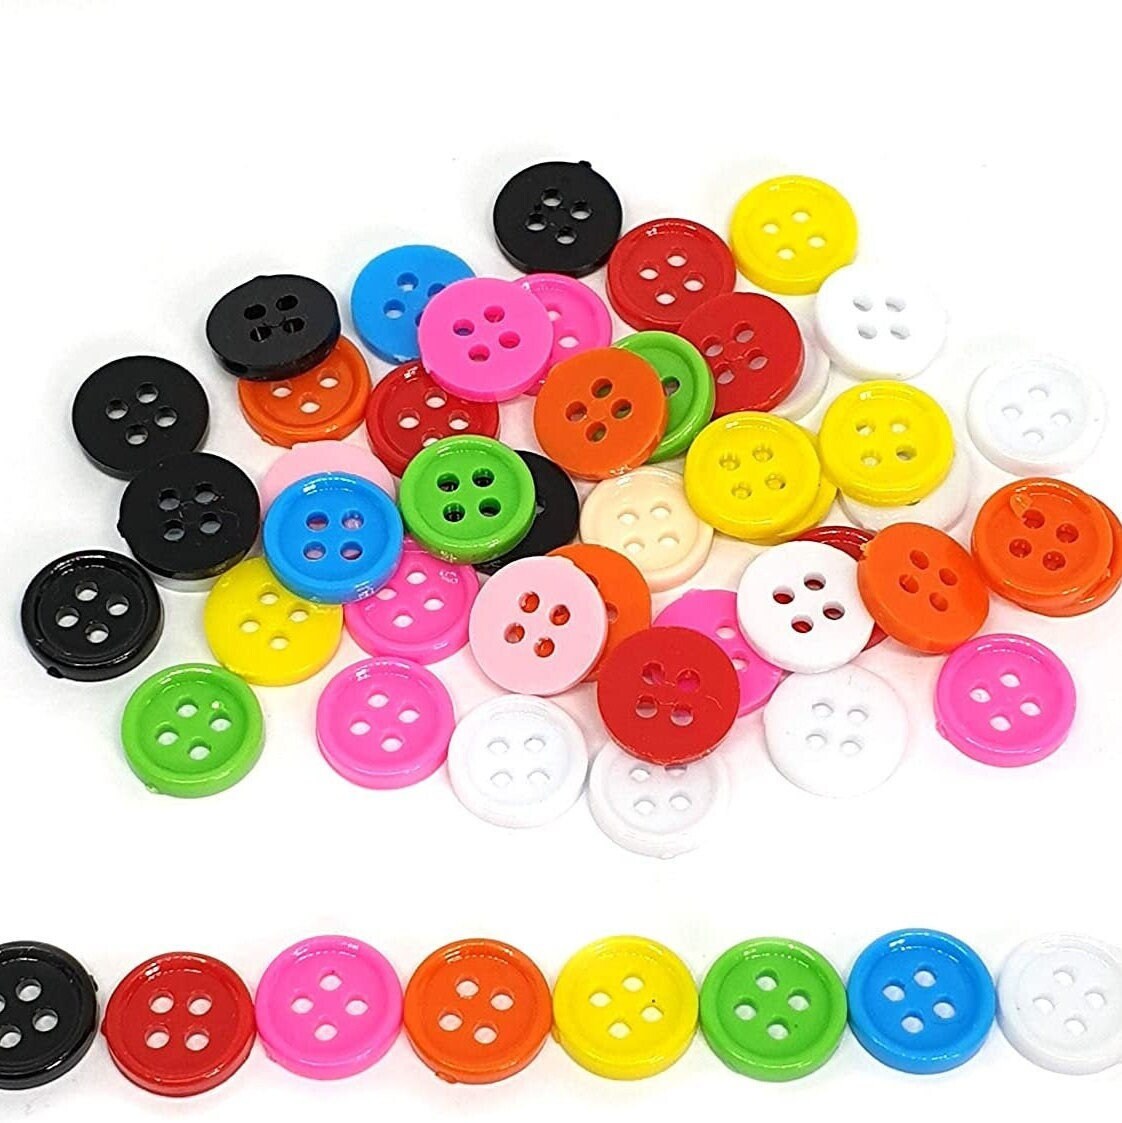 Iridescent deadstock polyester dress shirt buttons in 9mm and 11mm